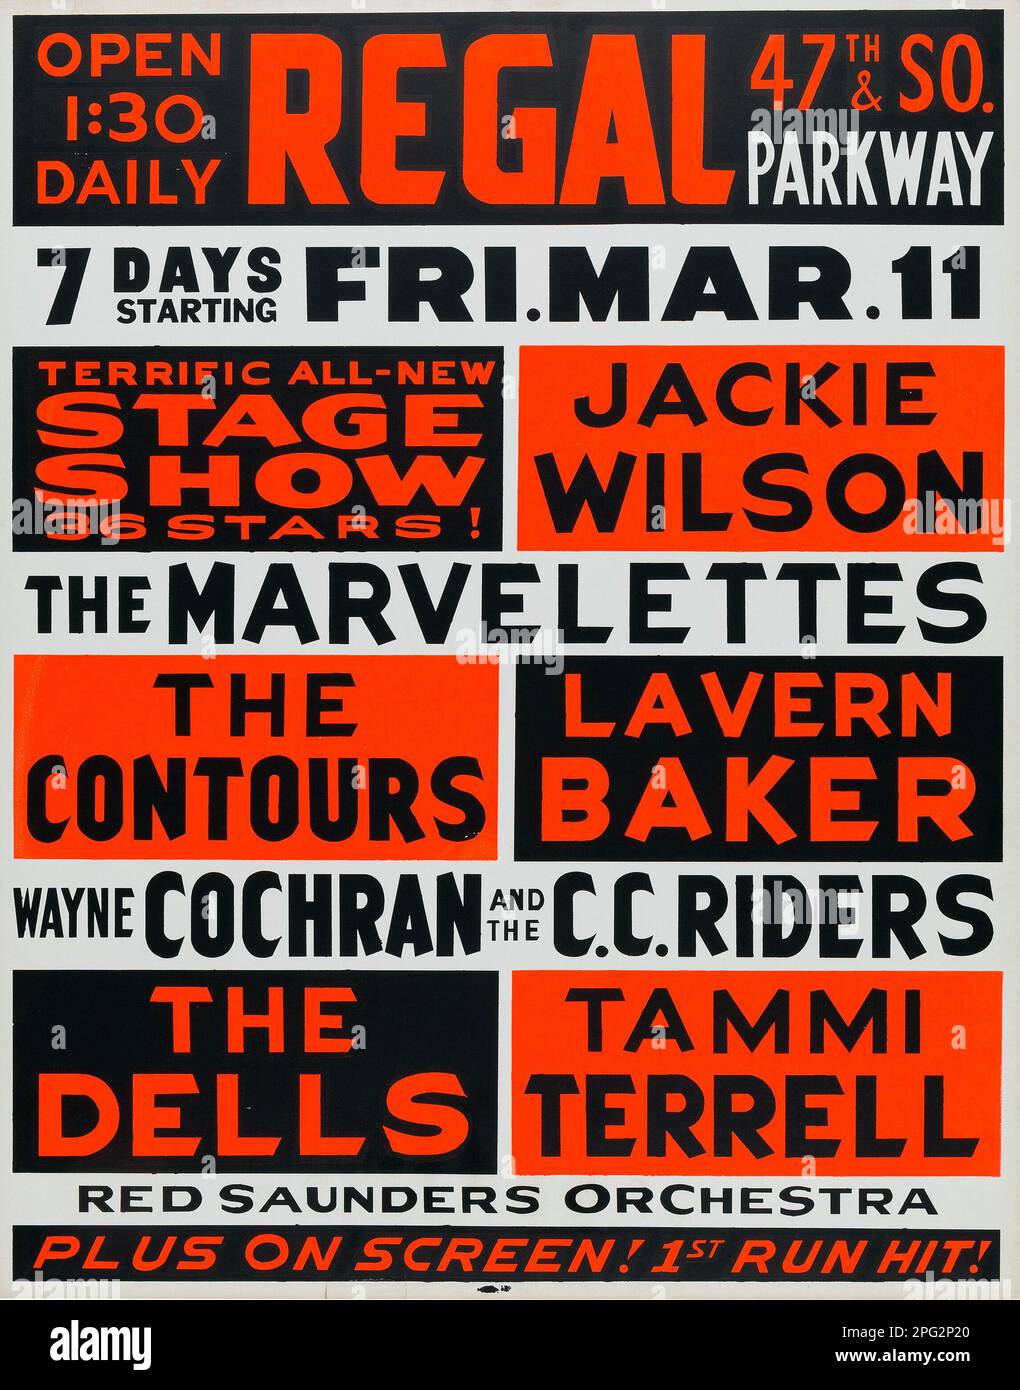 REGAL Parkway - Jackie Wilson, Marvelettes, Lavern Baker, The Contours, CC Riders & More 1966 Chicago Concert Poster Stockfoto